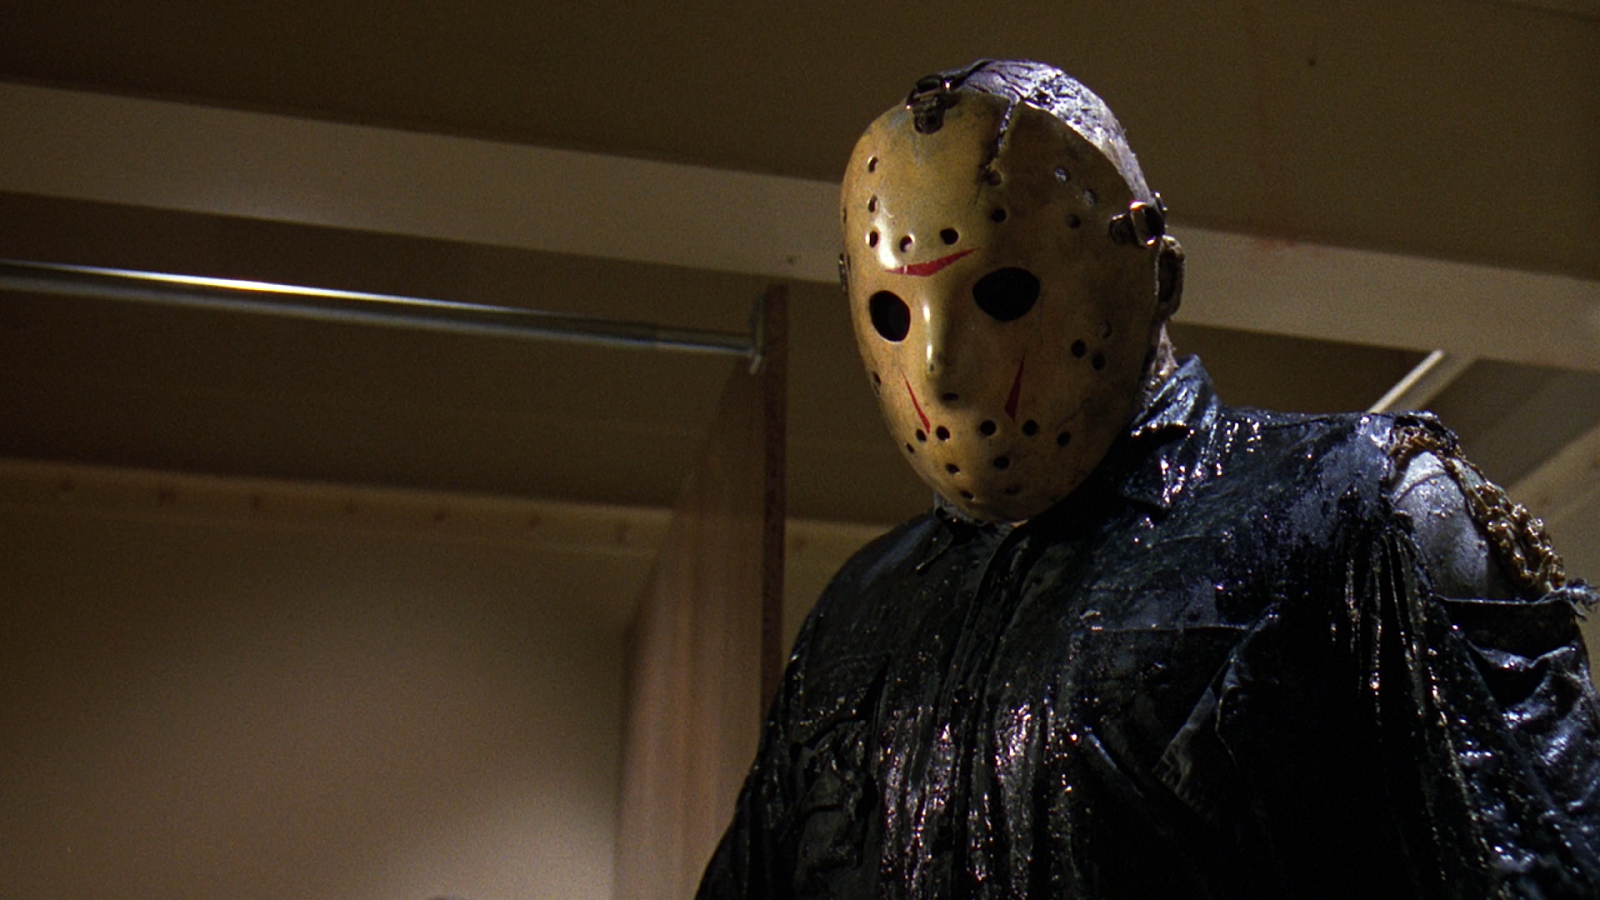 jason voorhees friday the 13th